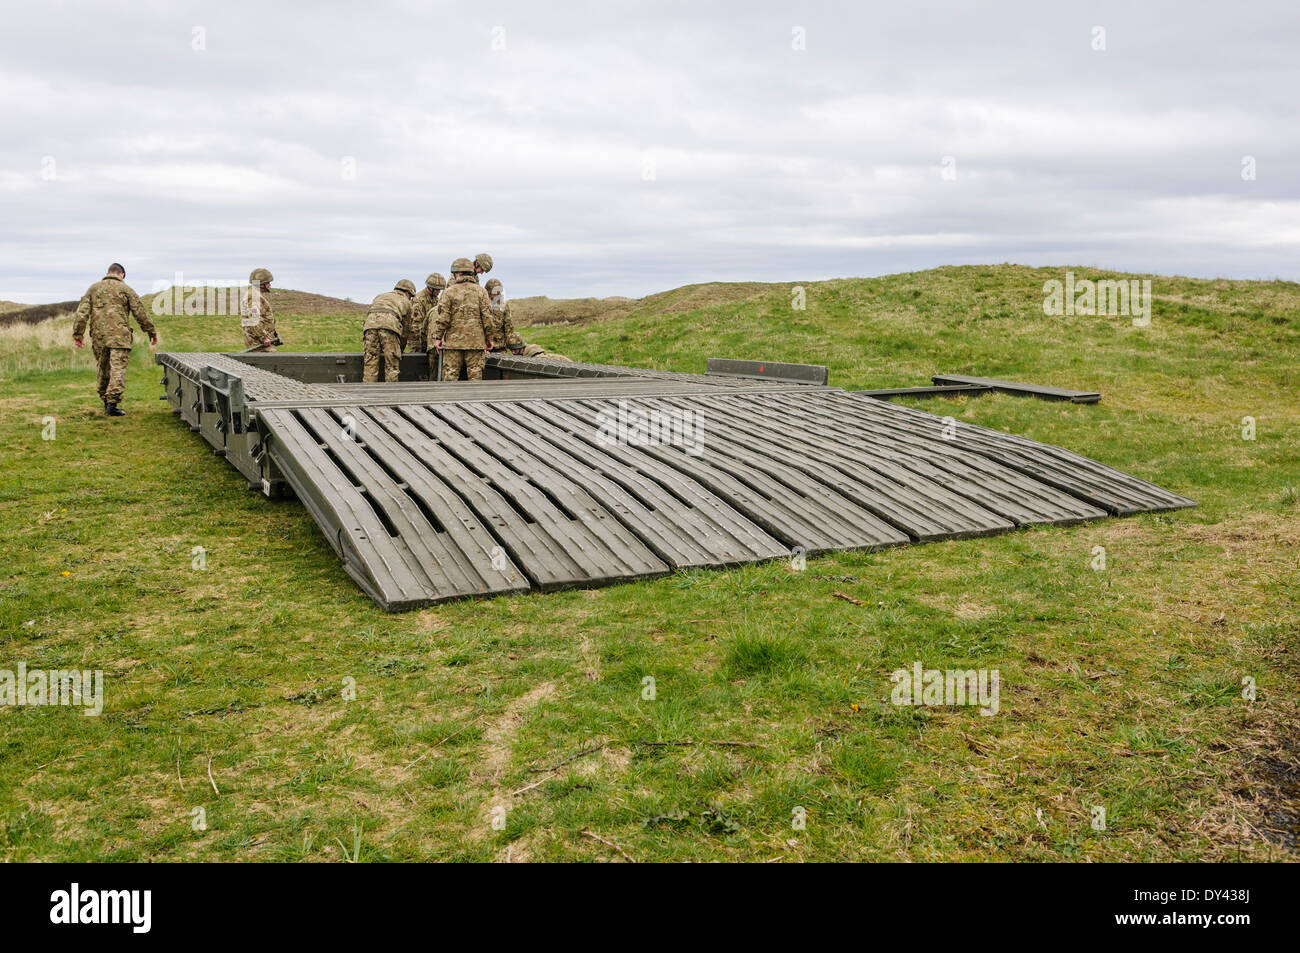 Soldiers from the Royal Engineers assemble a mobile bridge Stock Photo